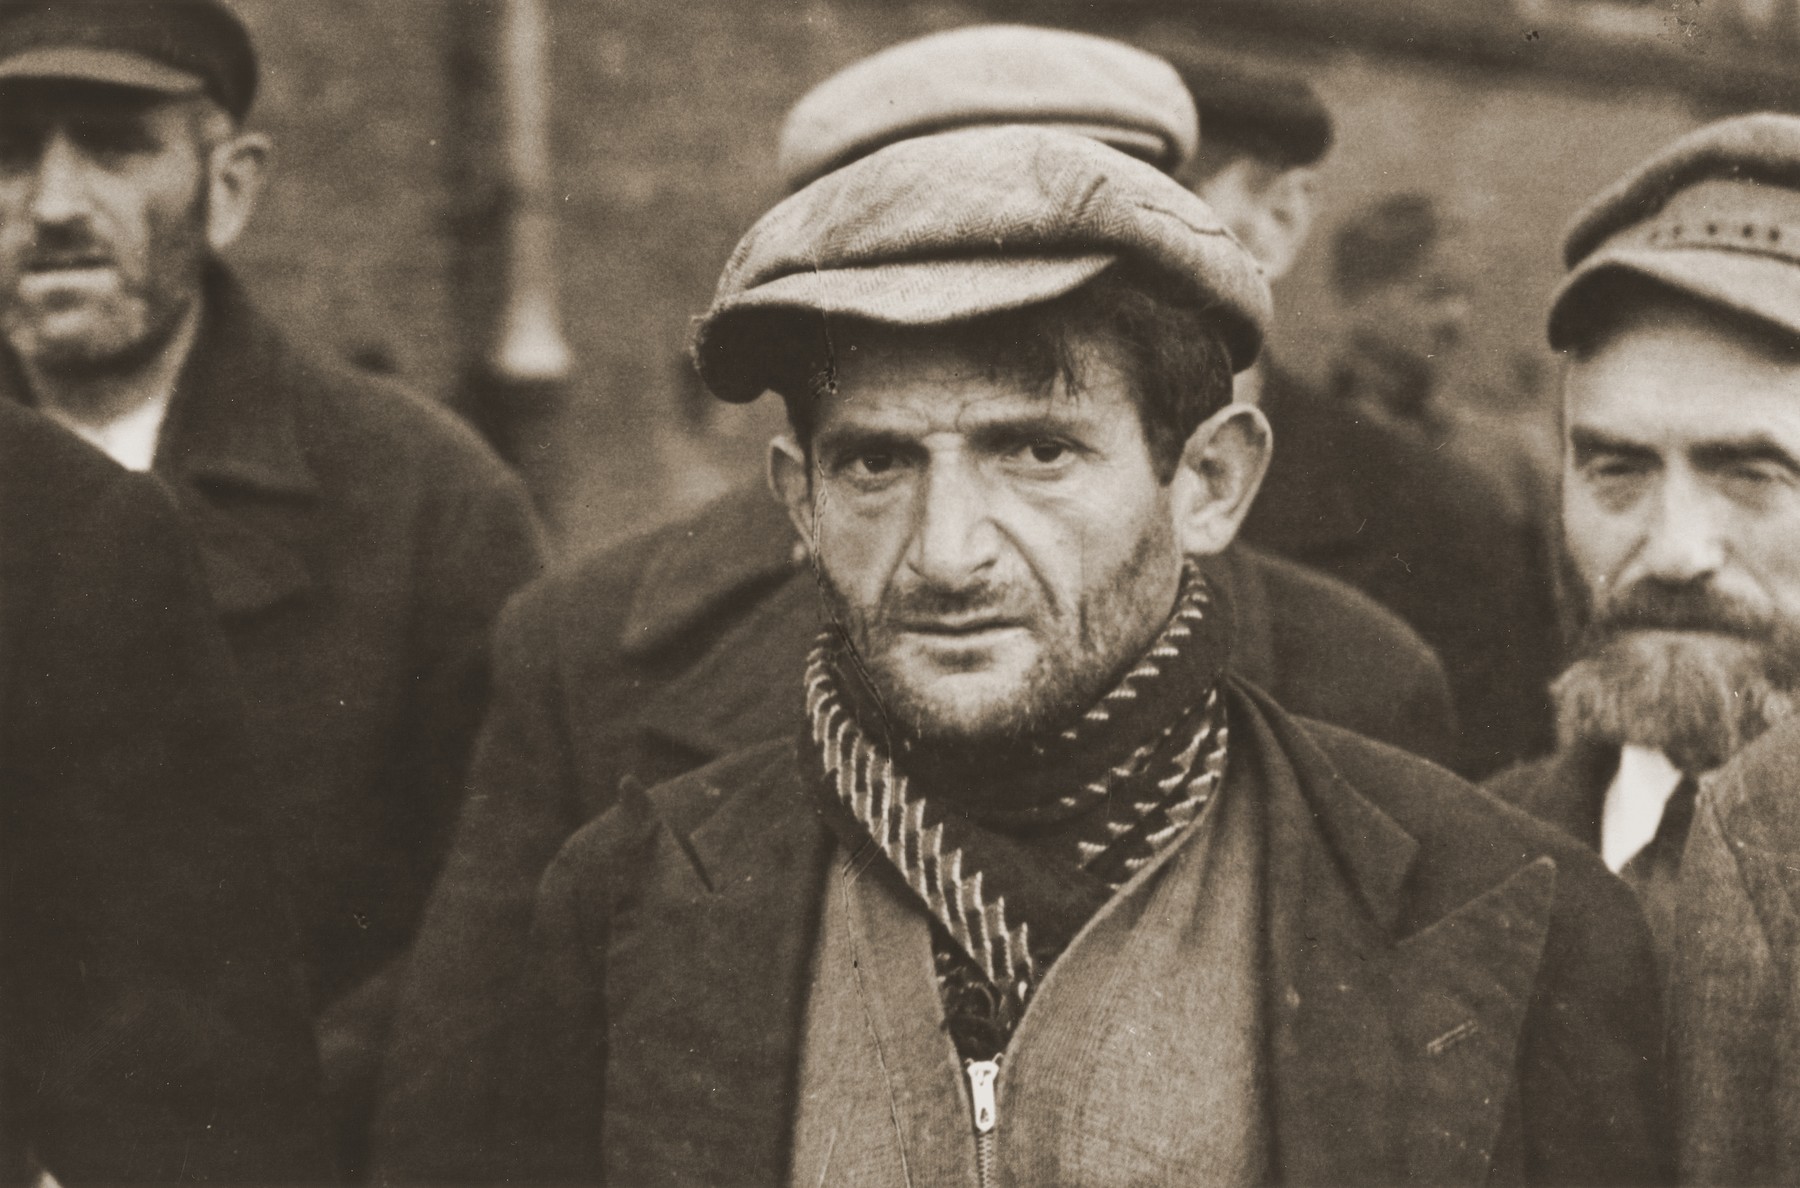 Close-up of a group of Jewish men who have been rounded-up by German soldiers in Aleksandrow Kujawski .